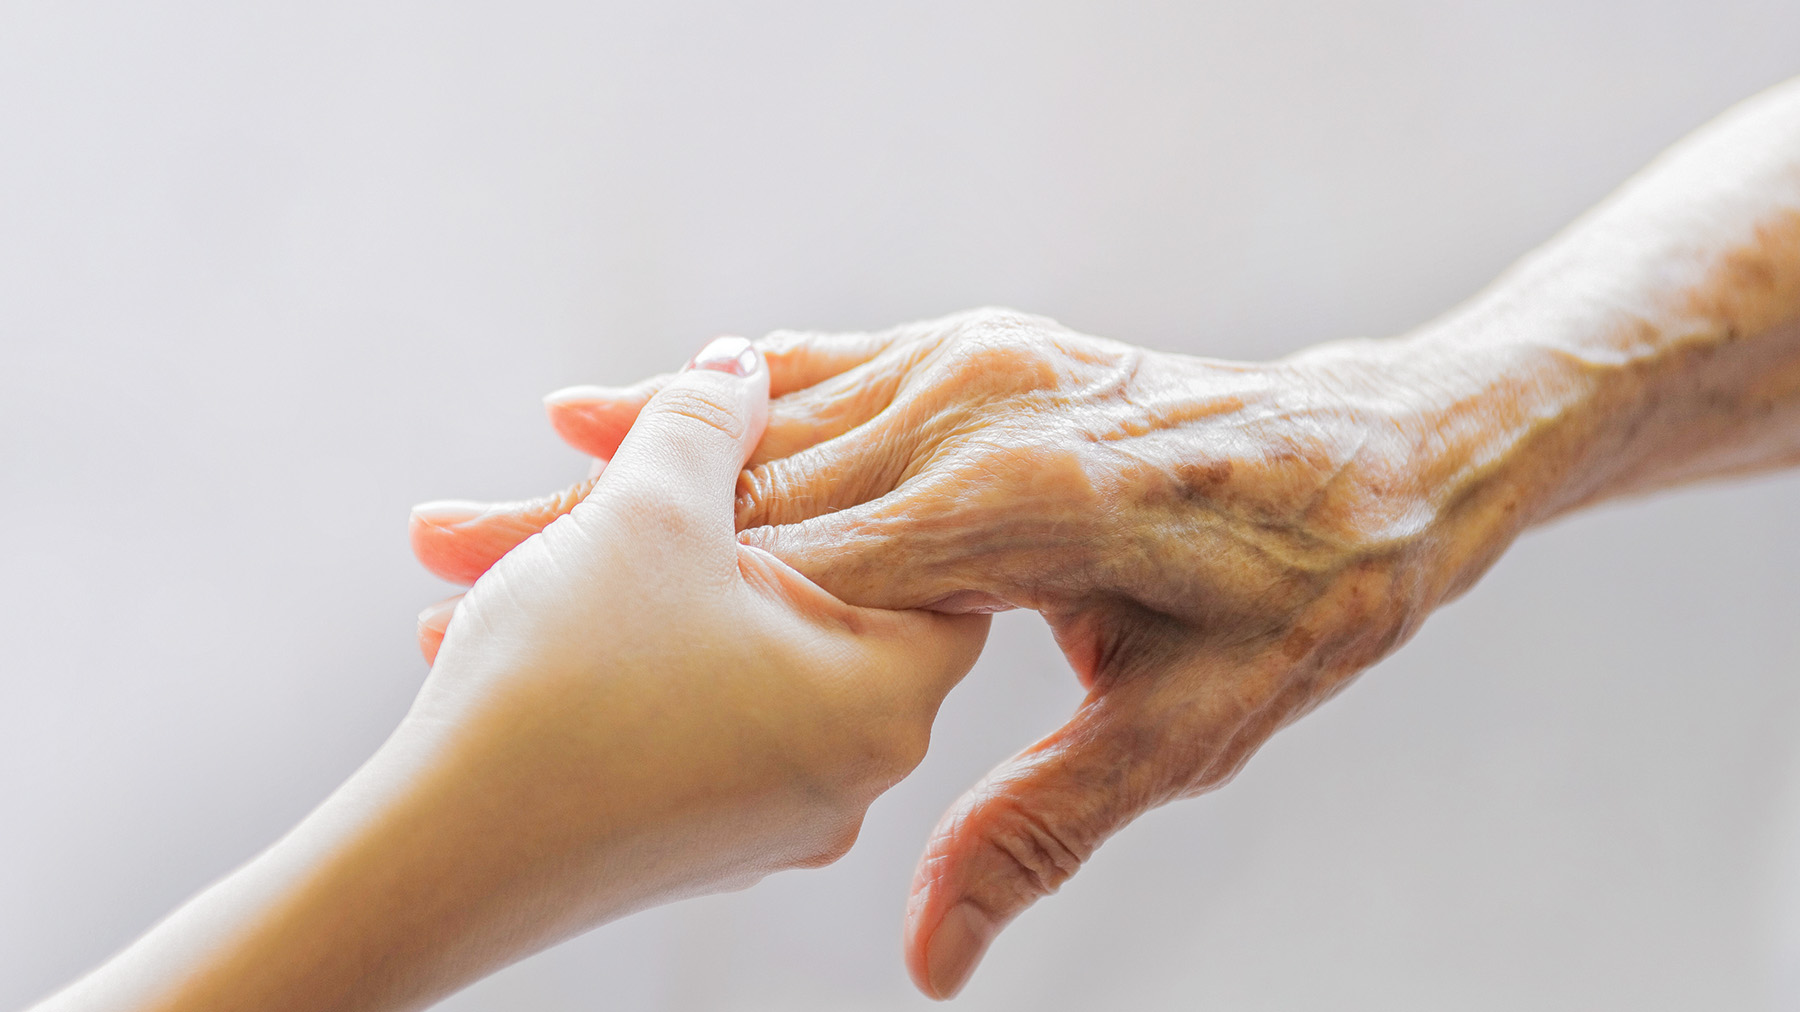 An arm from a young person grabs onto an arm from an elderly person.